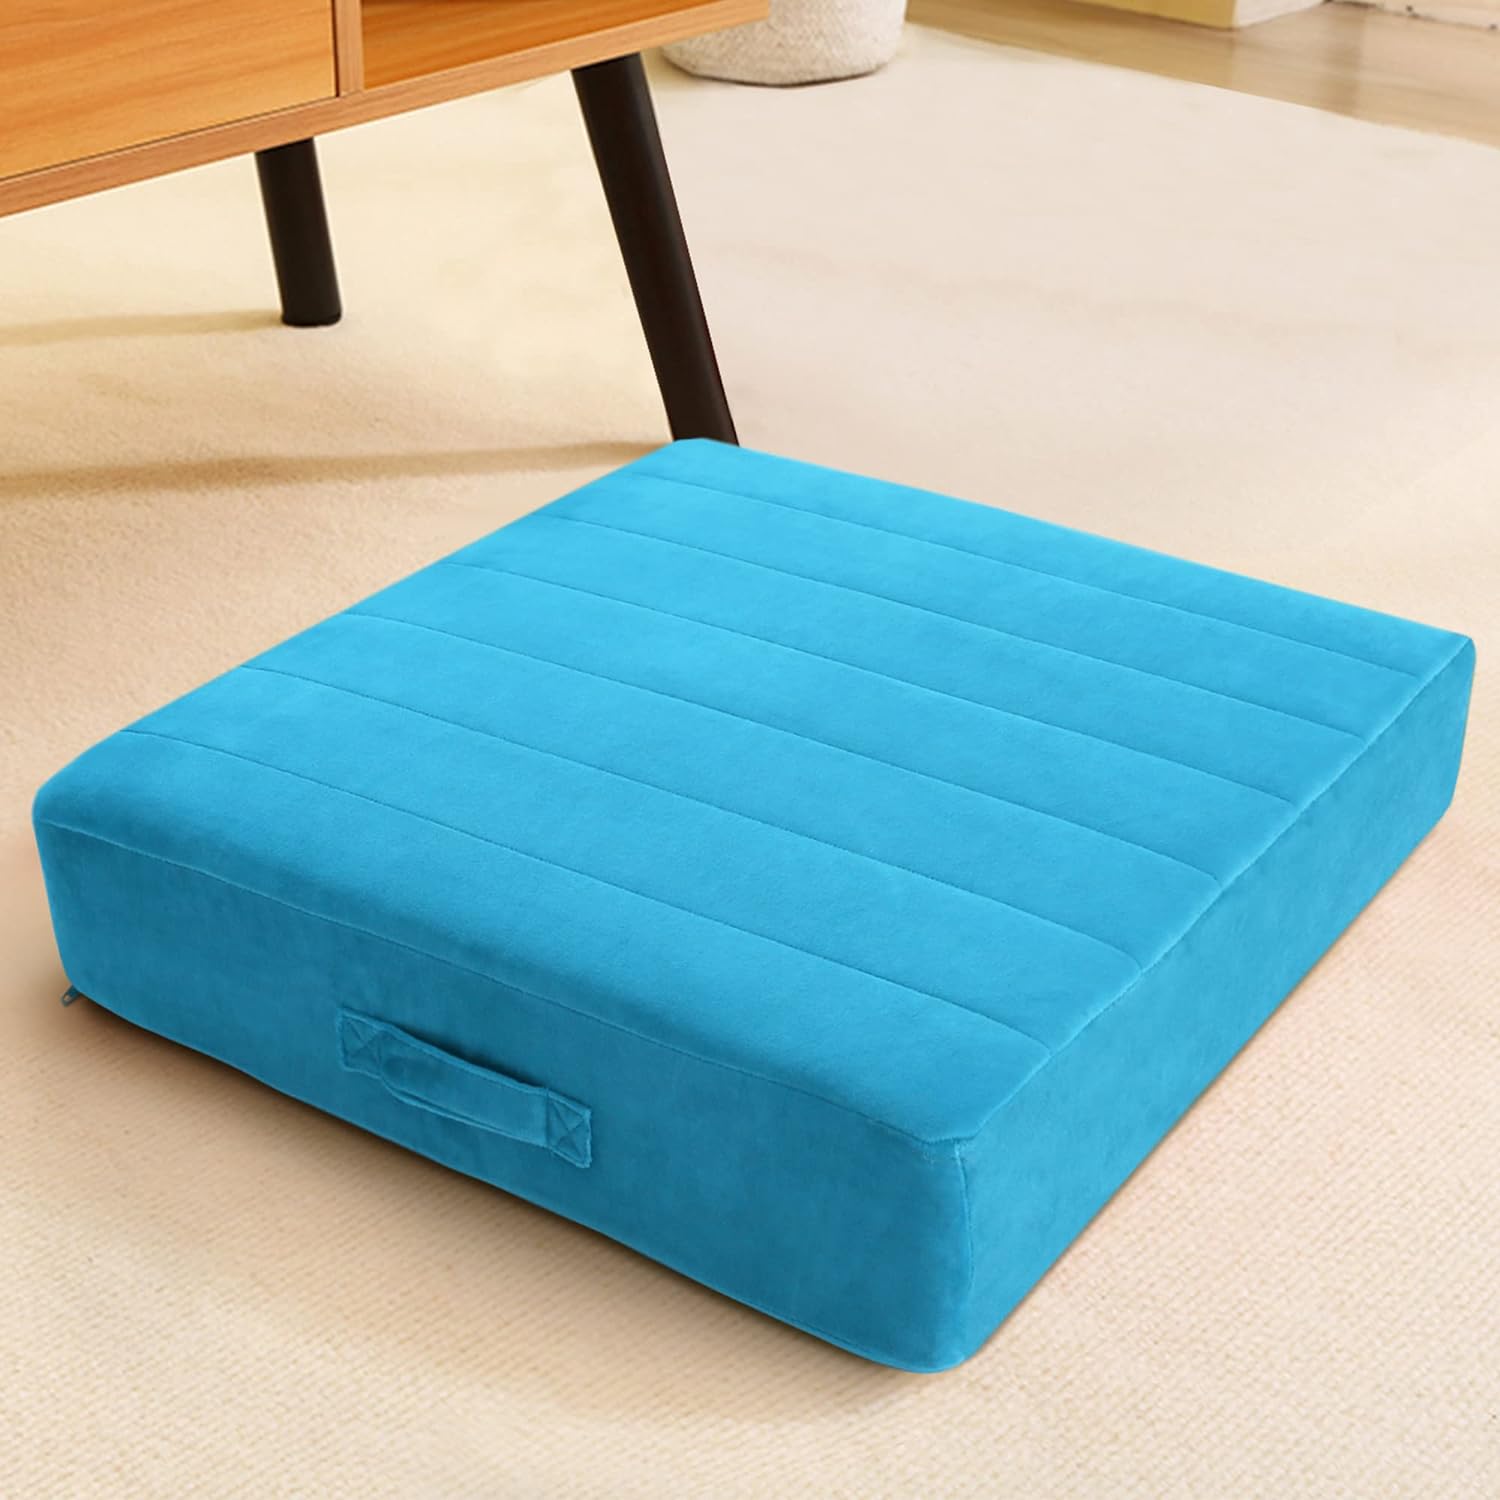 MeMoreCool Square Floor Pillow Seating for Adults Kids, Large Meditation Cushion Floor Pillow with Thick Foam & Soft Tufted Cover, Washable Big Pillow Seat Floor Cushion for Sitting Yoga 22" Blue